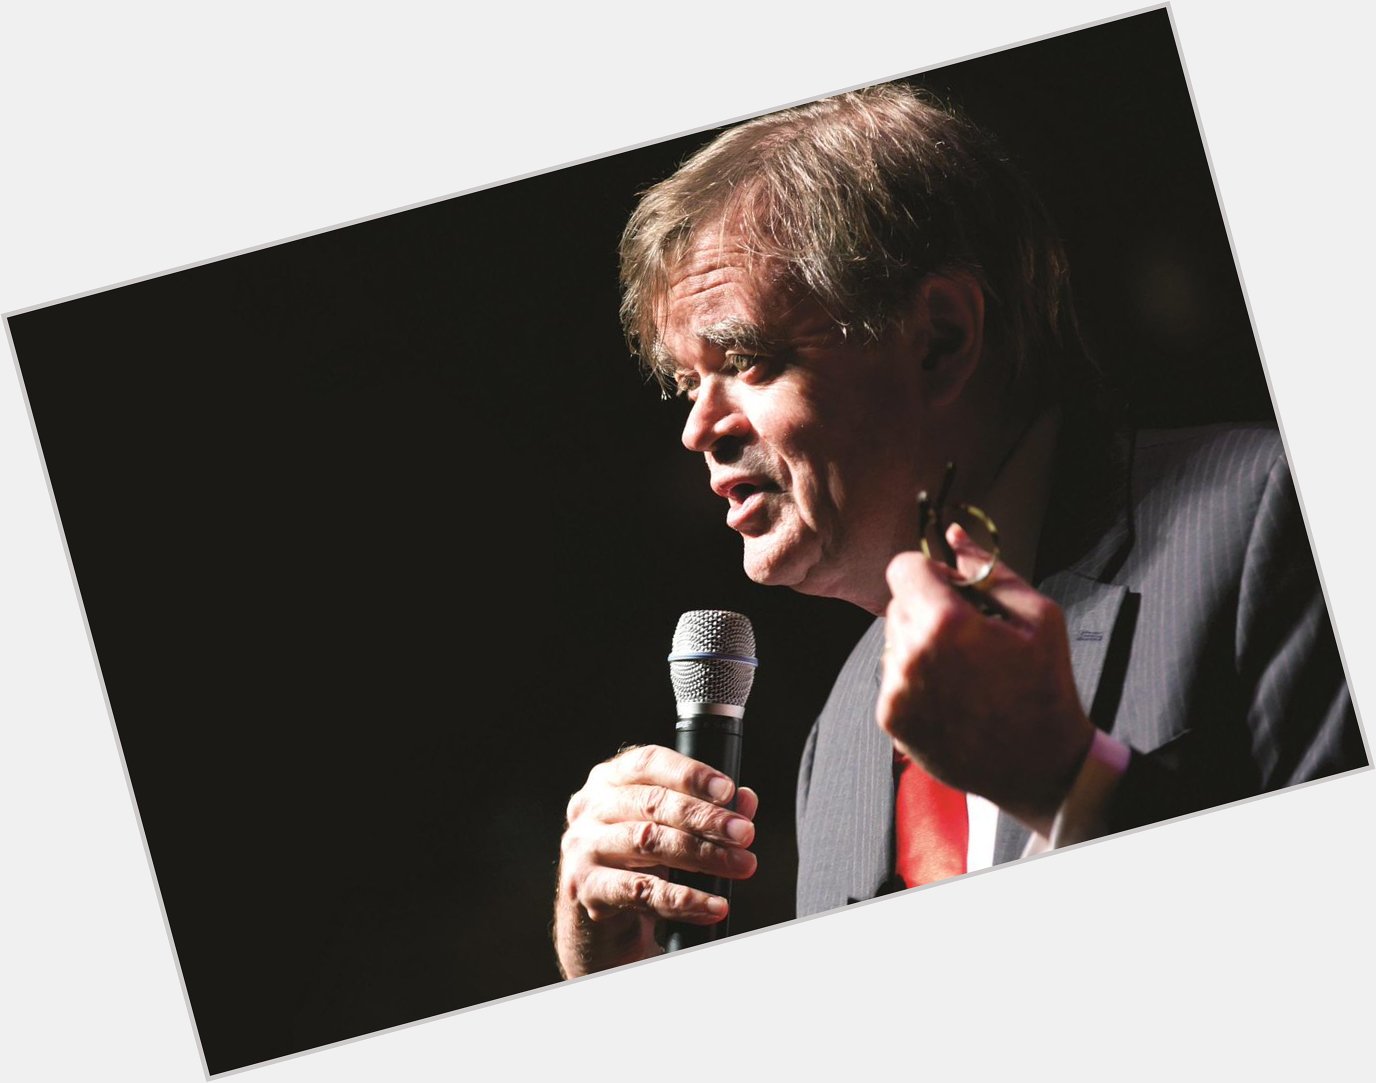 Happy birthday Garrison Keillor! love listening to your stories about the on 